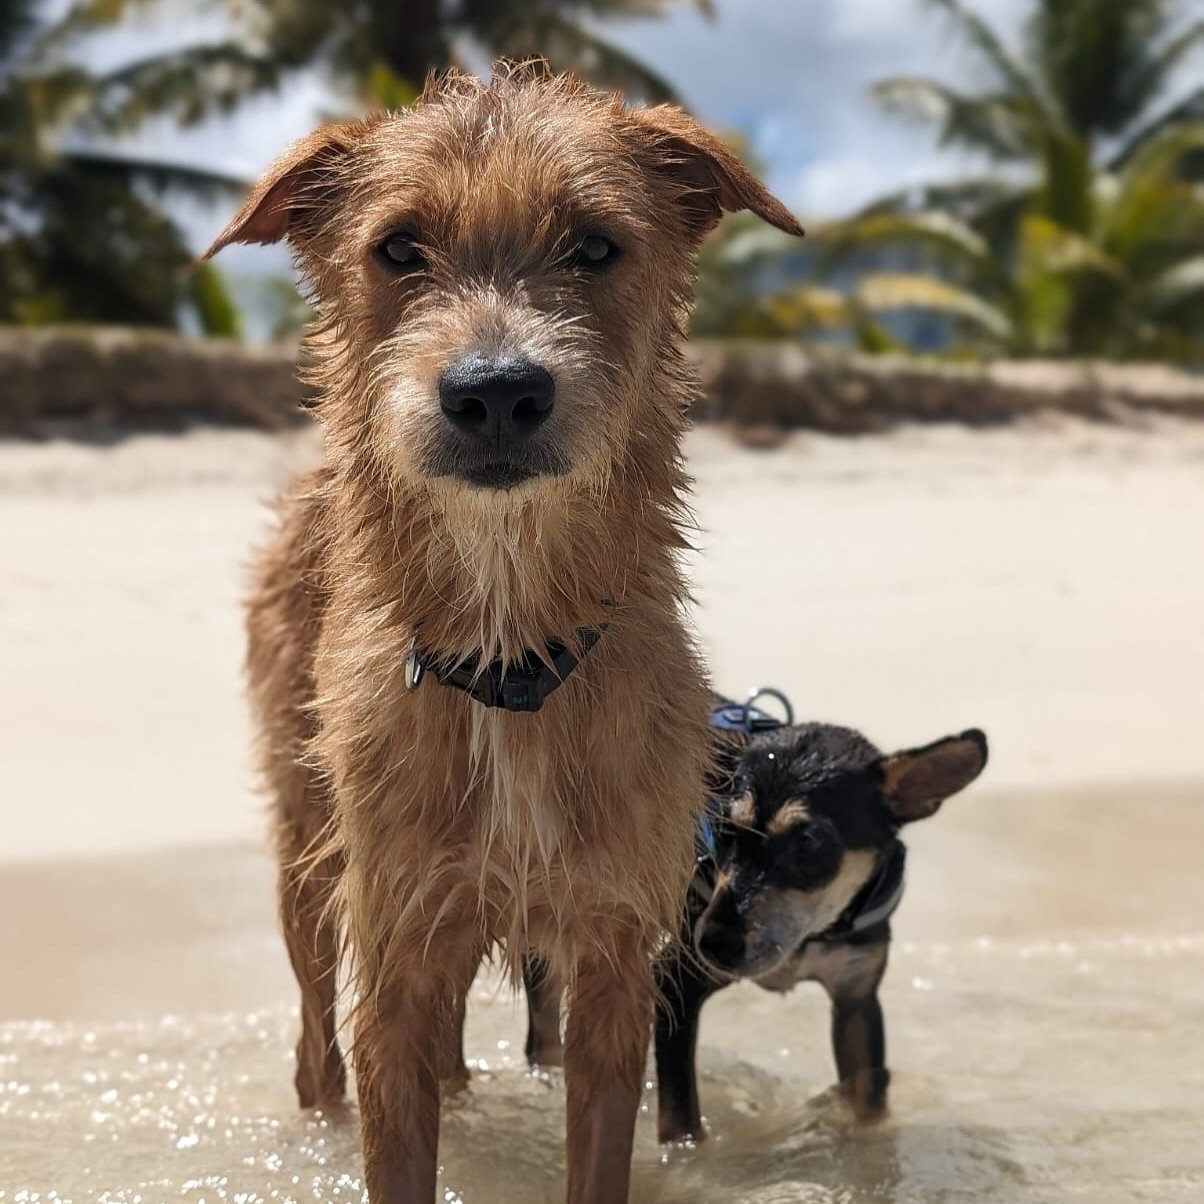 &hearts;️ Mayday for Mutts &hearts;️

At Saipan Humane Society, we LOVE mixed breed dogs - known here as Boonie Dogs. 

What&rsquo;s so special about a boonie?

They are bred by natural selection to be extremely intelligent, loyal, and resilient. And